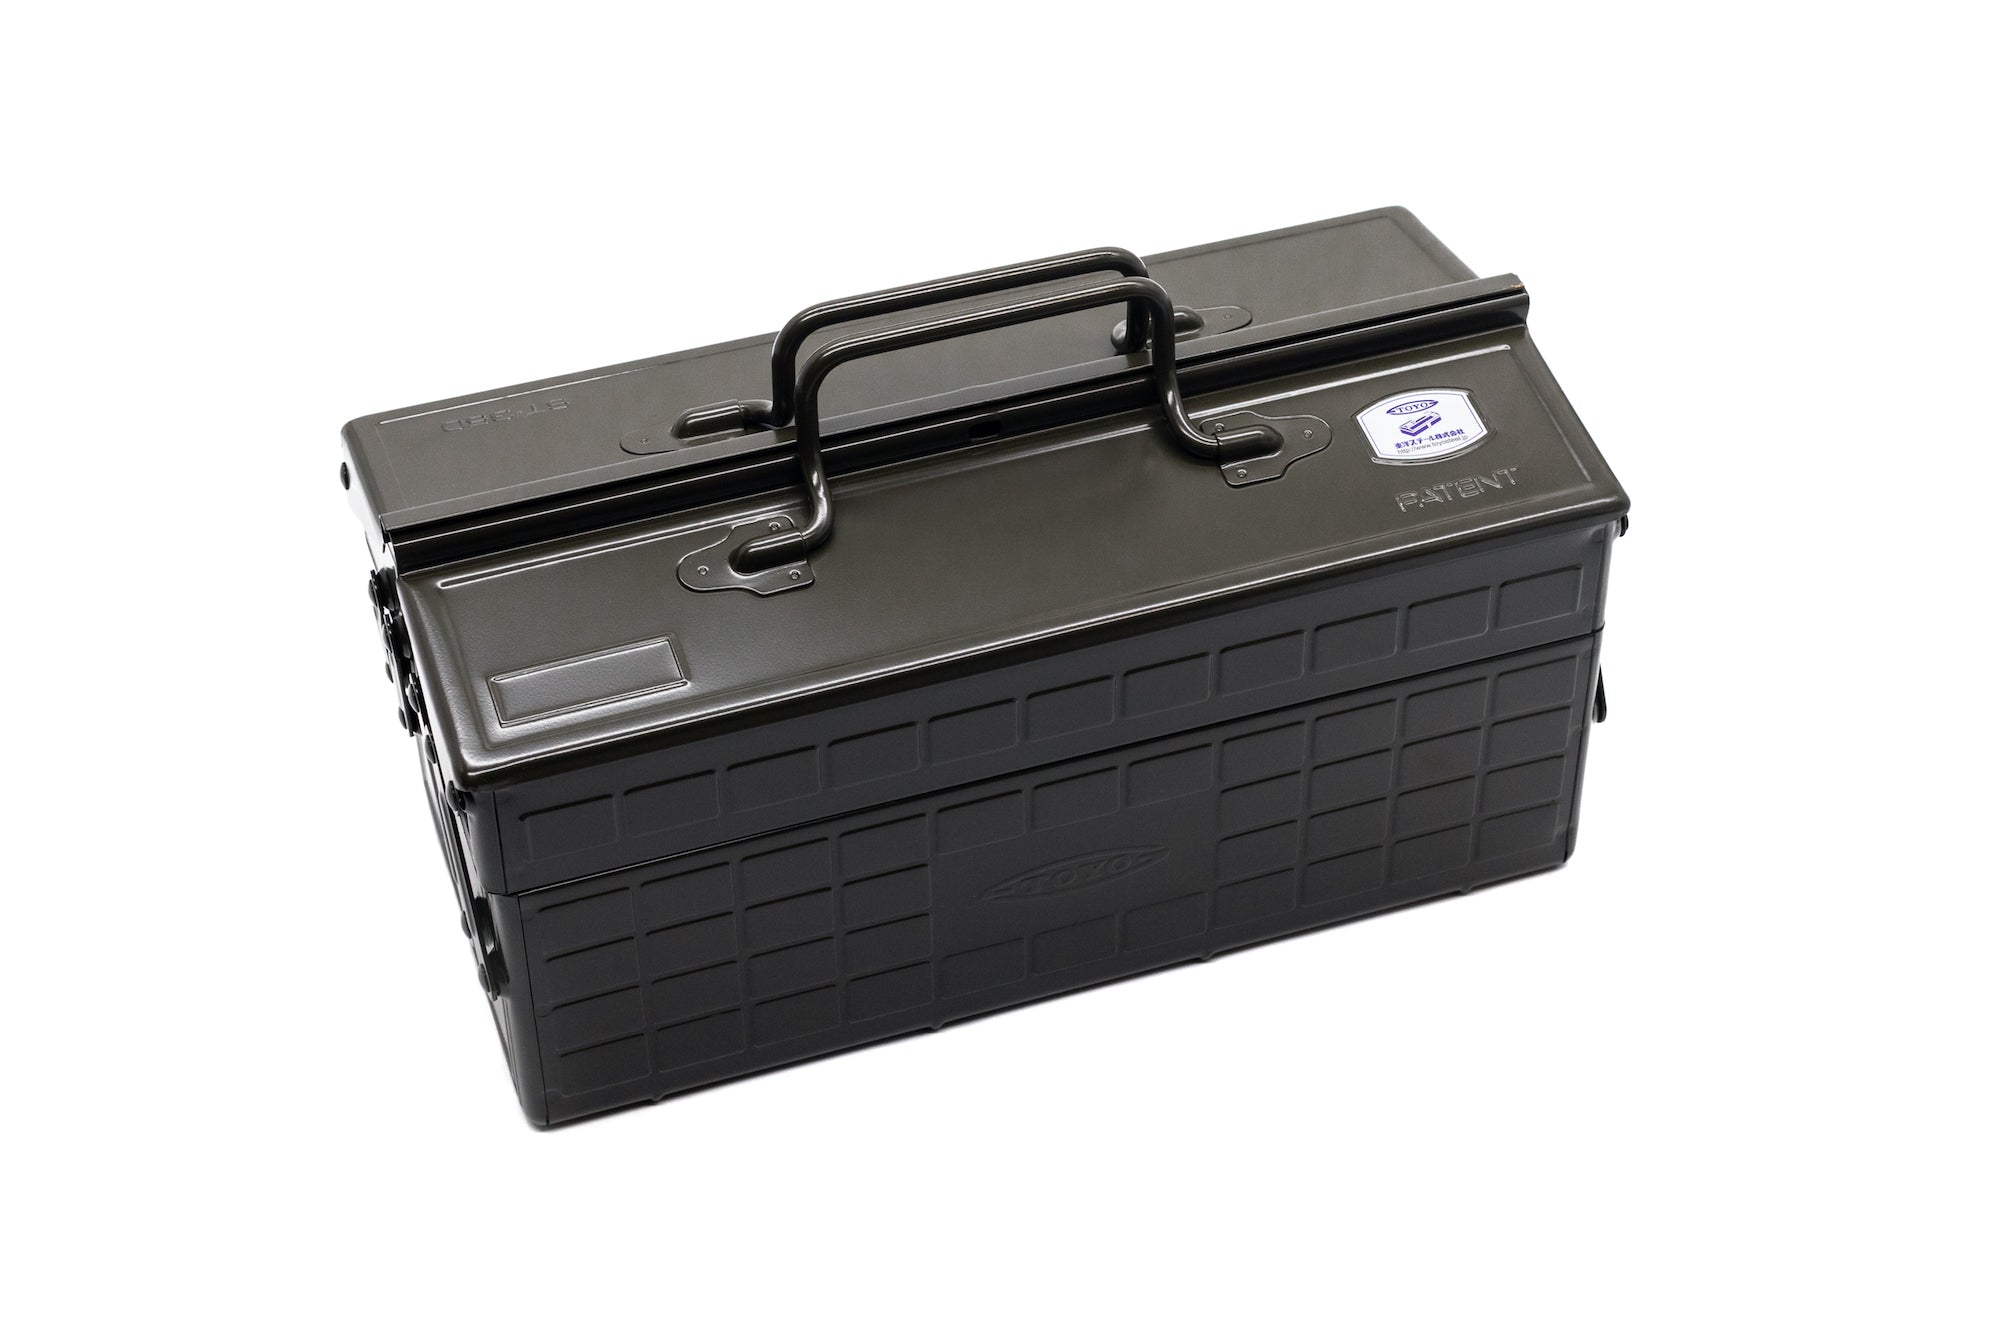 Toyo Steel Toolbox with Cantilever Lid and Upper Storage Trays - White